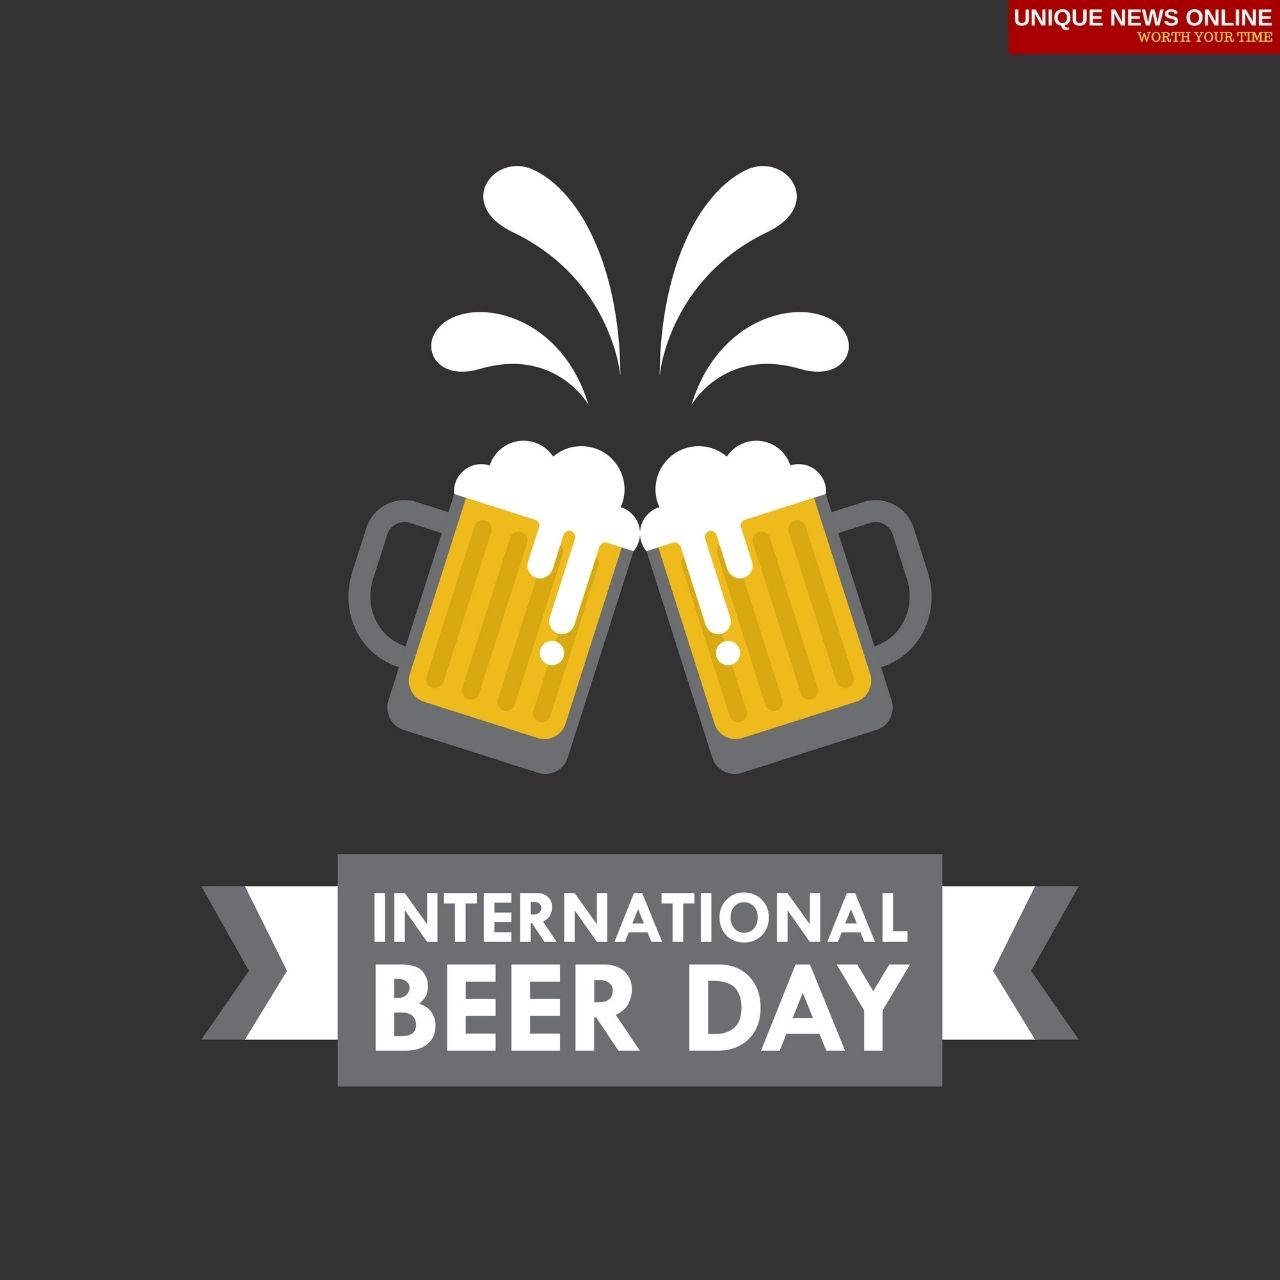 International Beer Day 2021 Quotes, HD Images, Wishes, and Gif to Celebrate the Day